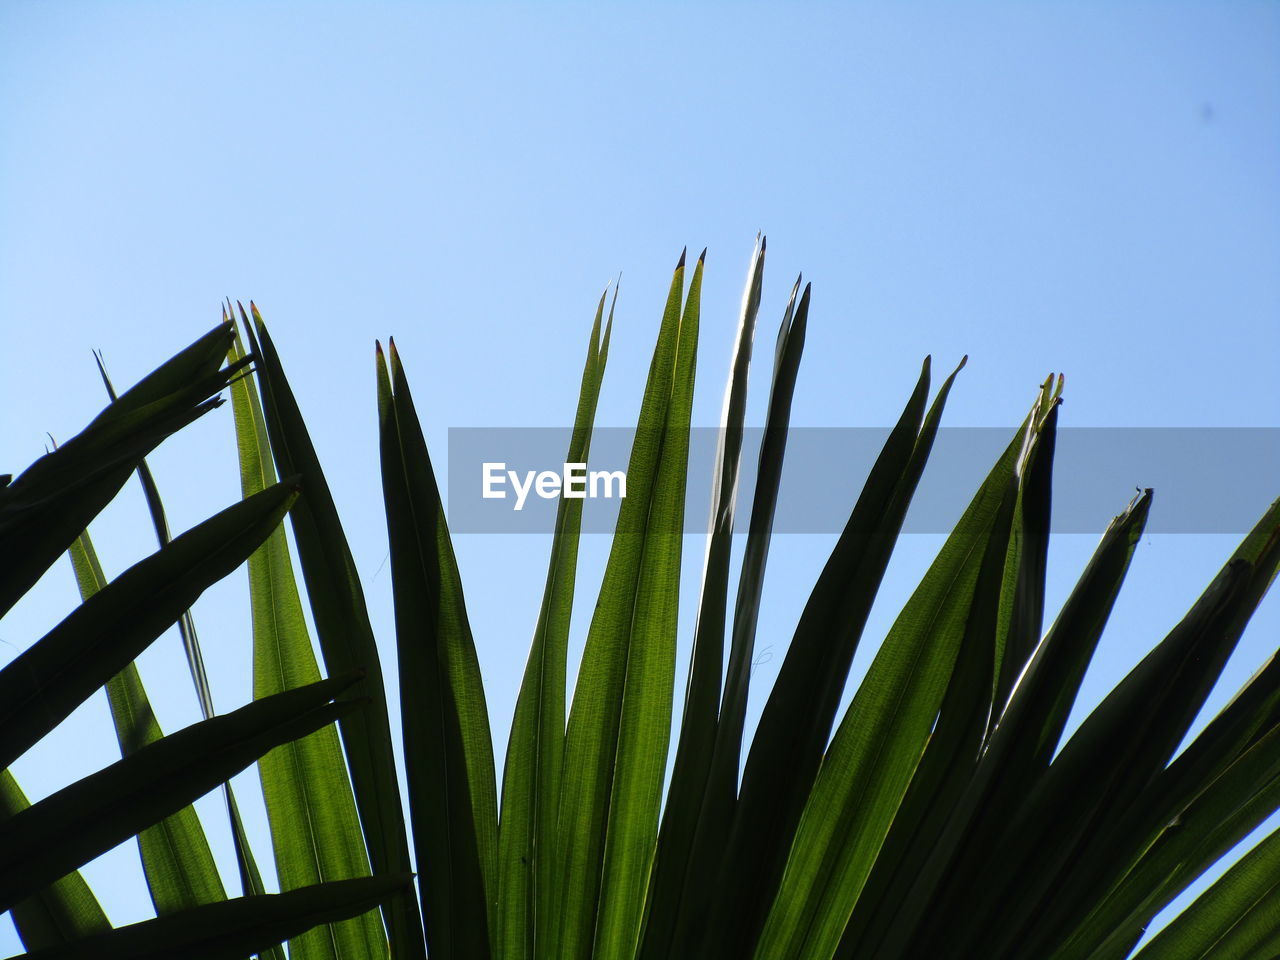 LOW ANGLE VIEW OF BAMBOO PLANT AGAINST CLEAR SKY